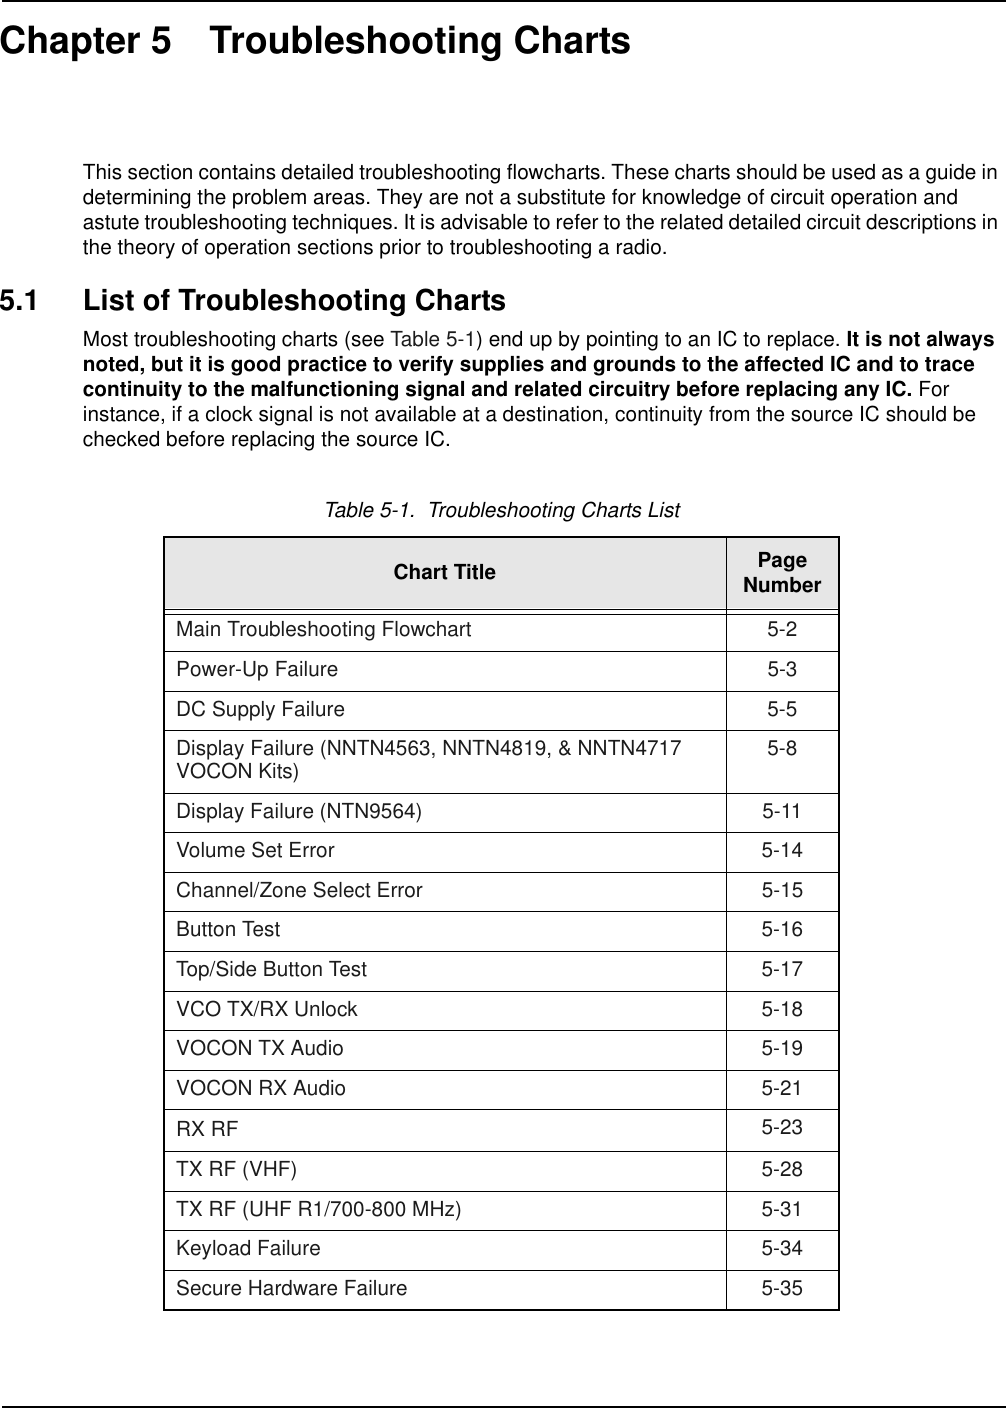 Chapter 5 Troubleshooting ChartsThis section contains detailed troubleshooting flowcharts. These charts should be used as a guide in determining the problem areas. They are not a substitute for knowledge of circuit operation and astute troubleshooting techniques. It is advisable to refer to the related detailed circuit descriptions in the theory of operation sections prior to troubleshooting a radio.5.1 List of Troubleshooting ChartsMost troubleshooting charts (see Table 5-1) end up by pointing to an IC to replace. It is not always noted, but it is good practice to verify supplies and grounds to the affected IC and to trace continuity to the malfunctioning signal and related circuitry before replacing any IC. For instance, if a clock signal is not available at a destination, continuity from the source IC should be checked before replacing the source IC.Table 5-1.  Troubleshooting Charts ListChart Title Page NumberMain Troubleshooting Flowchart 5-2Power-Up Failure 5-3DC Supply Failure 5-5Display Failure (NNTN4563, NNTN4819, &amp; NNTN4717 VOCON Kits) 5-8Display Failure (NTN9564) 5-11Volume Set Error 5-14Channel/Zone Select Error 5-15Button Test 5-16Top/Side Button Test 5-17VCO TX/RX Unlock 5-18VOCON TX Audio 5-19VOCON RX Audio 5-21RX RF 5-23TX RF (VHF) 5-28TX RF (UHF R1/700-800 MHz) 5-31Keyload Failure 5-34Secure Hardware Failure 5-35